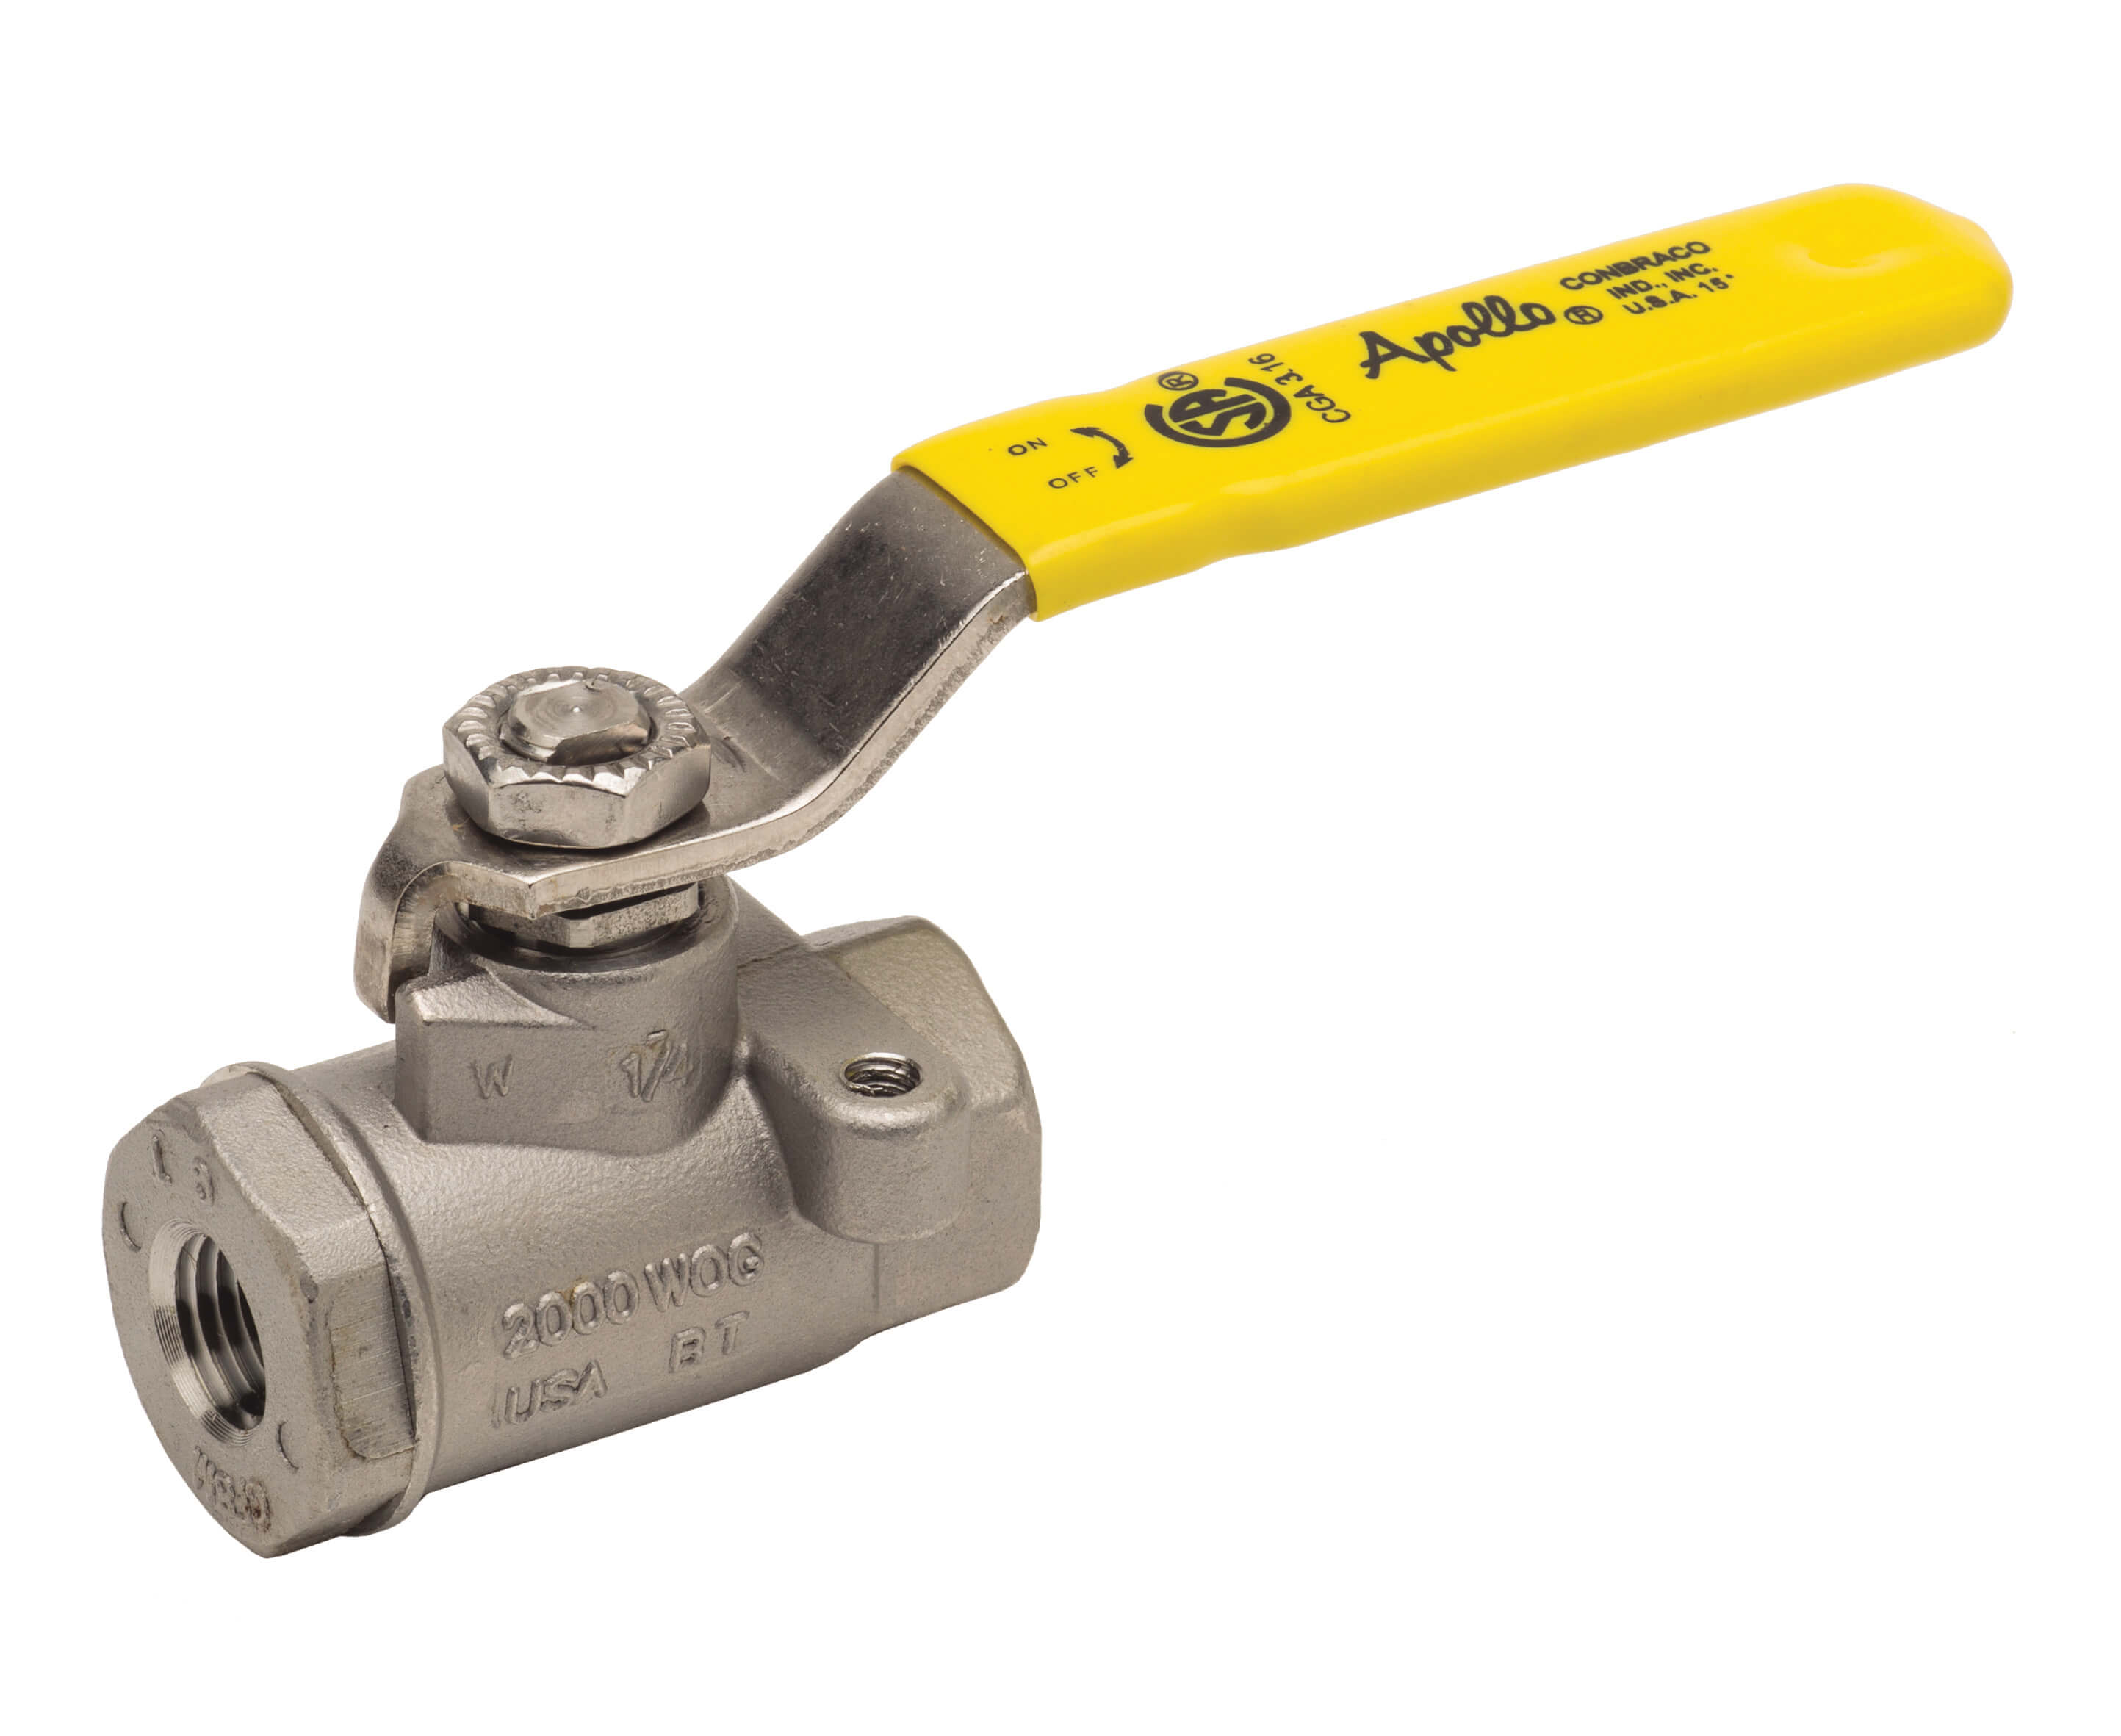 Ball Valve, Size 1-1/2 Inch NPT, Stainless Steel, Chain Latch Lever